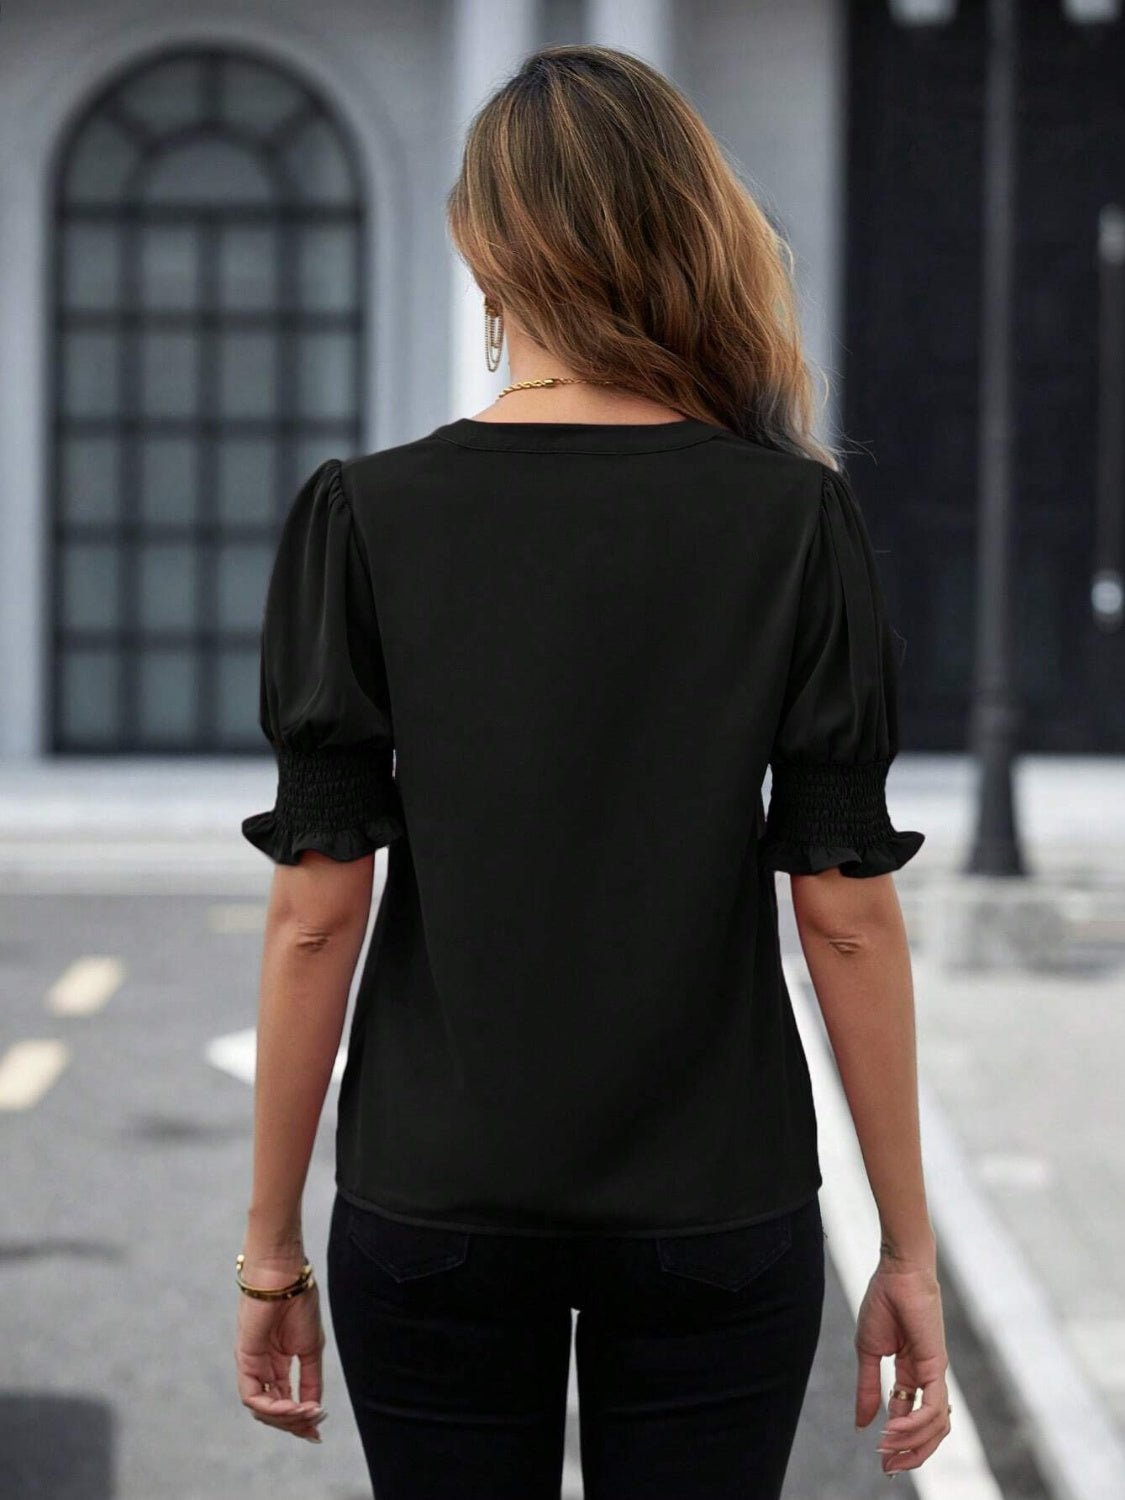 Notched Short Sleeve Blouse - Fashion Girl Online Store